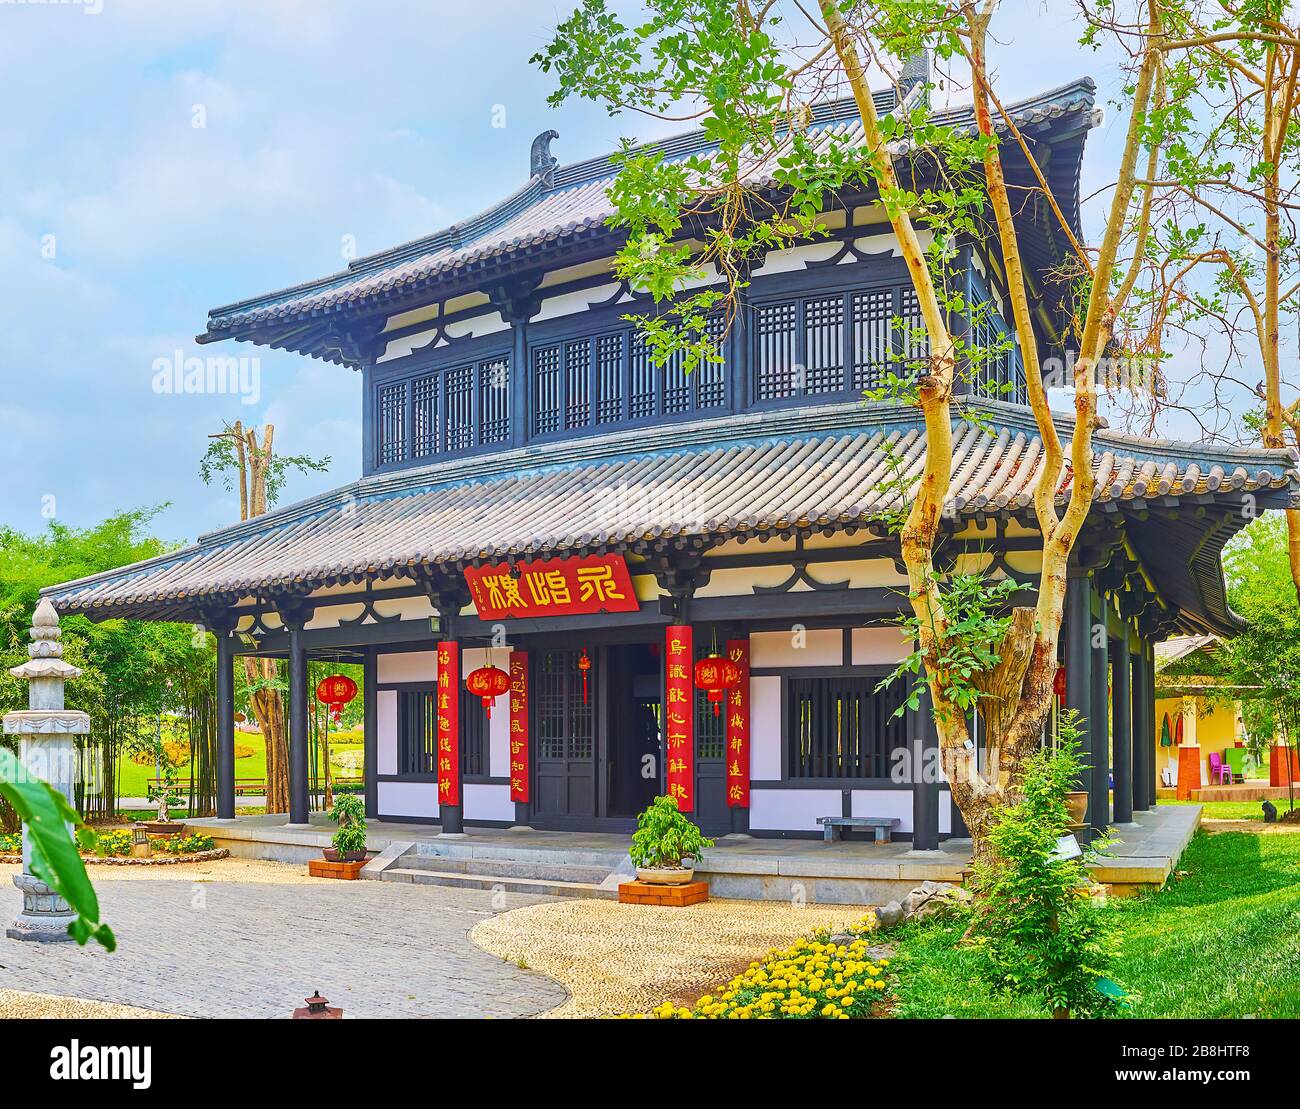 CHIANG MAI, THAILAND - MAY 7, 2019: The facade of black-white wooden pavilion of China garden with multi-tired tile roof, many windows and lanterns, R Stock Photo